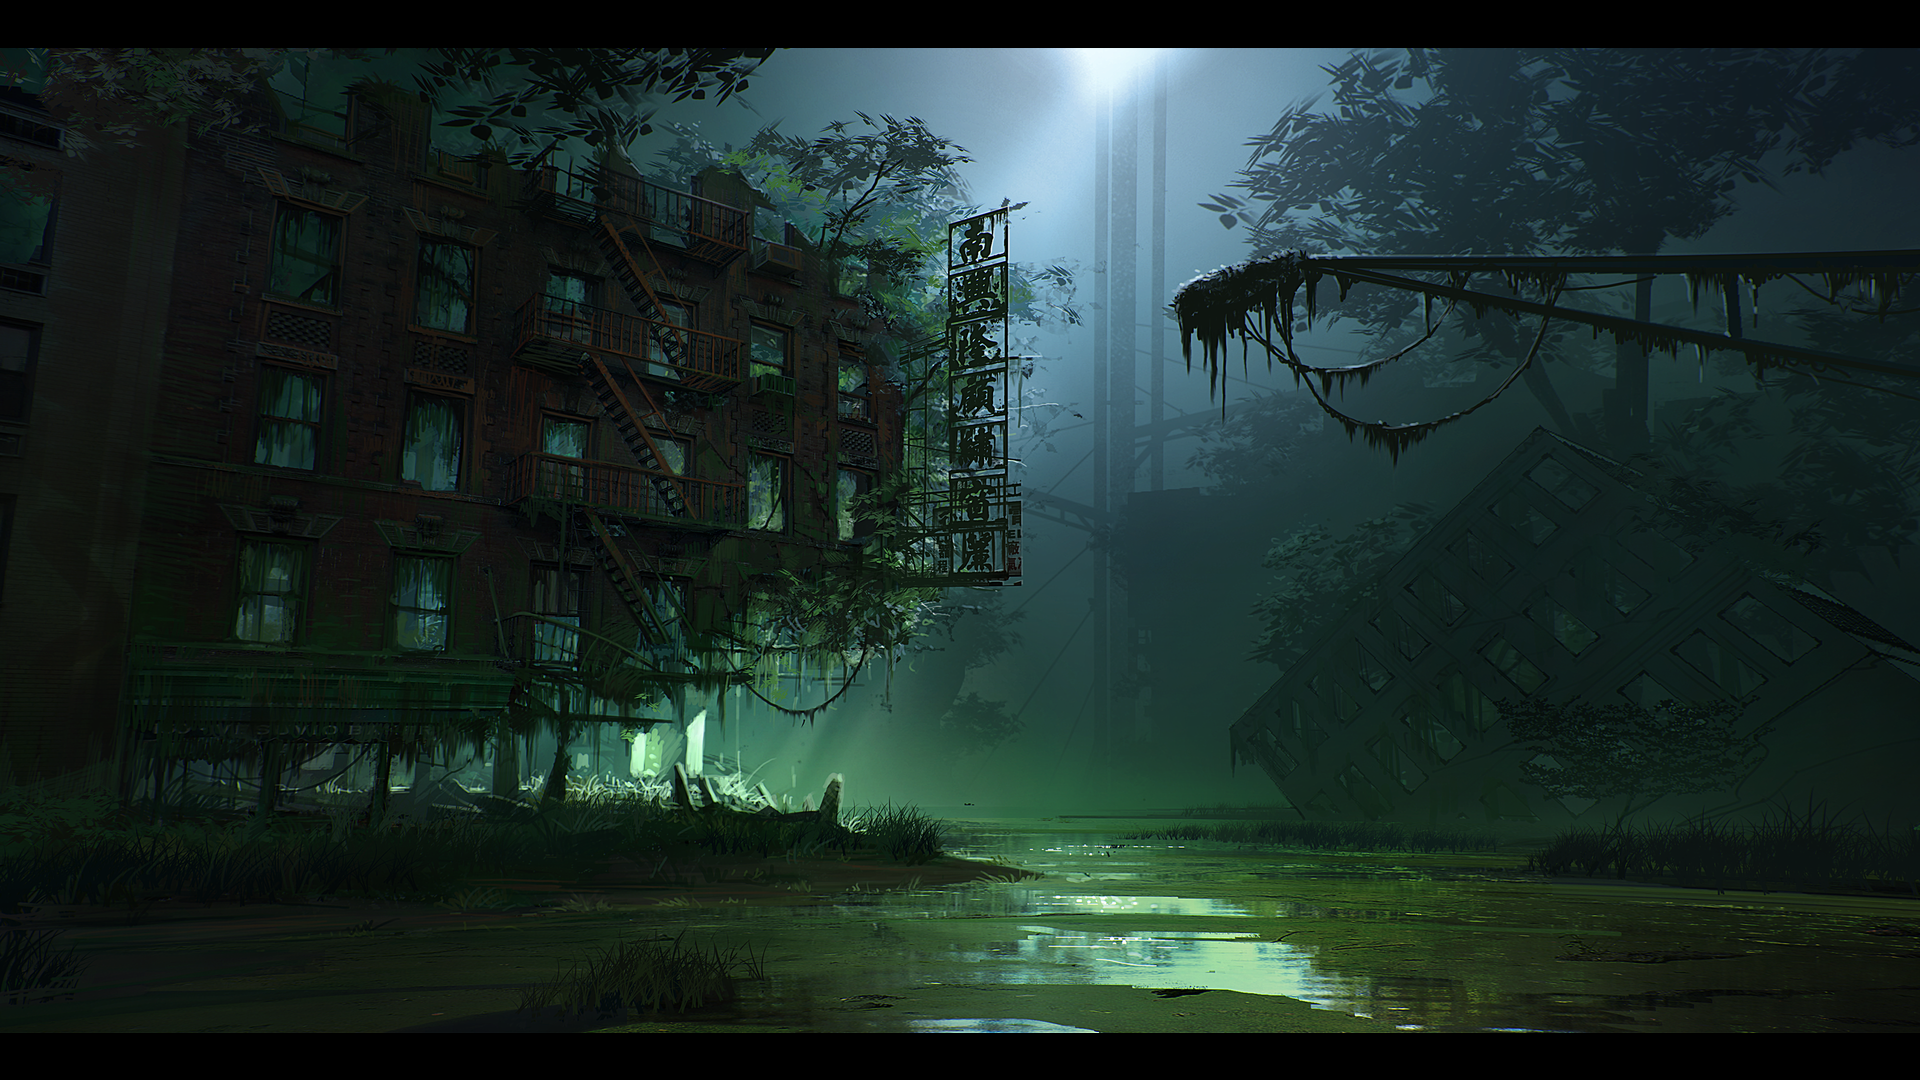 A swamp depicted in the anima